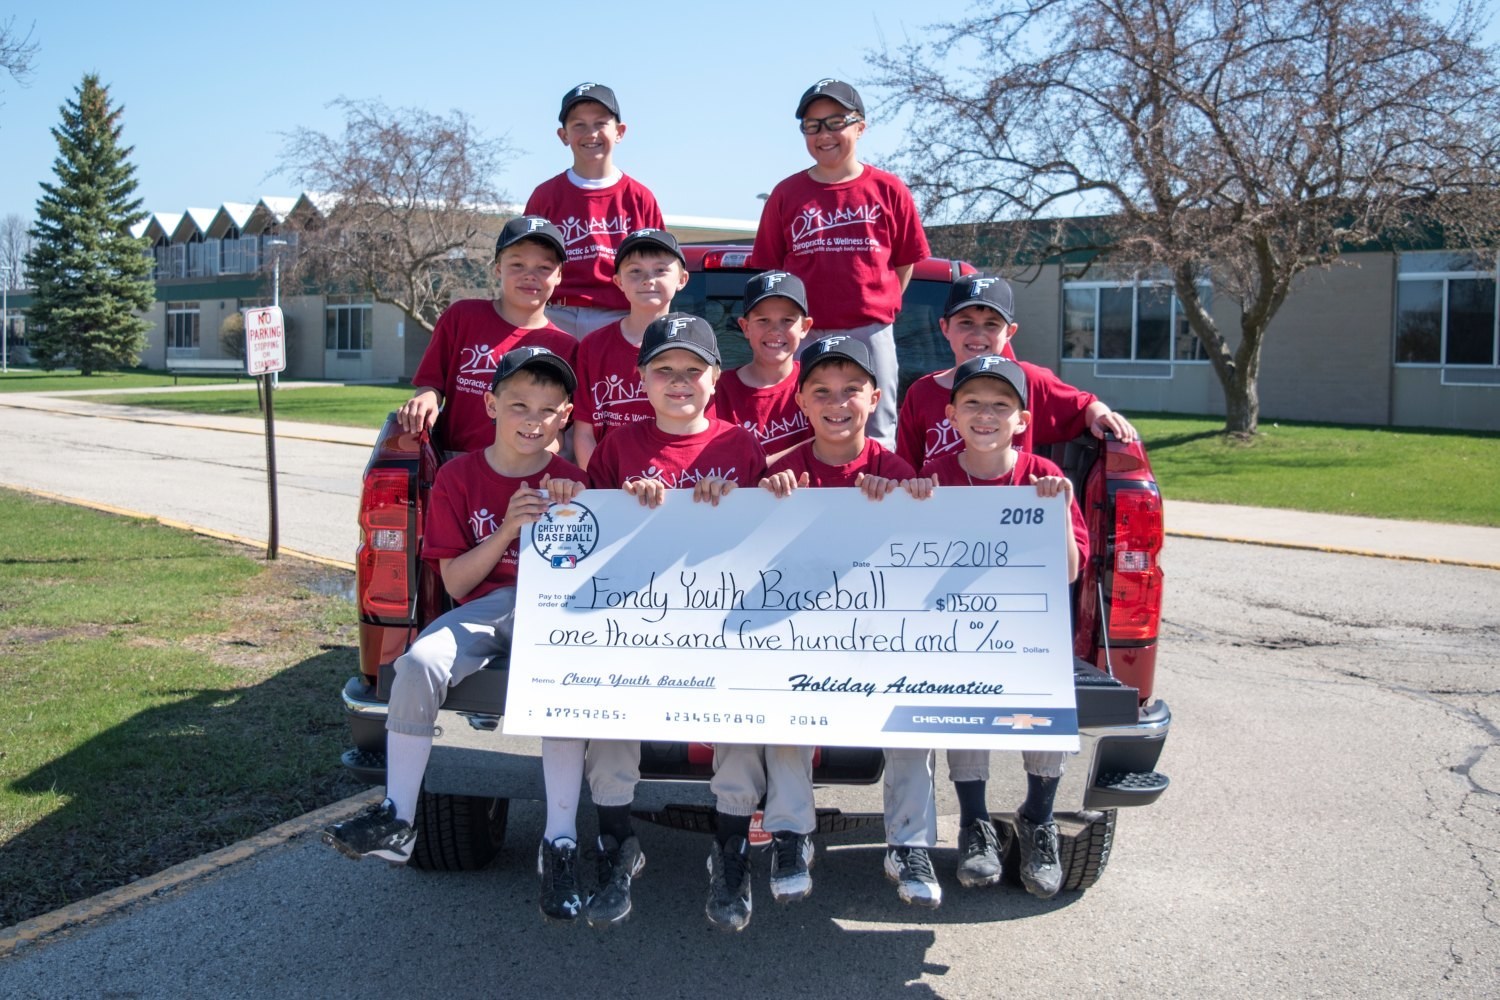 Local youth baseball team accepts check on behalf of the Fondy Youth Baseball organization.